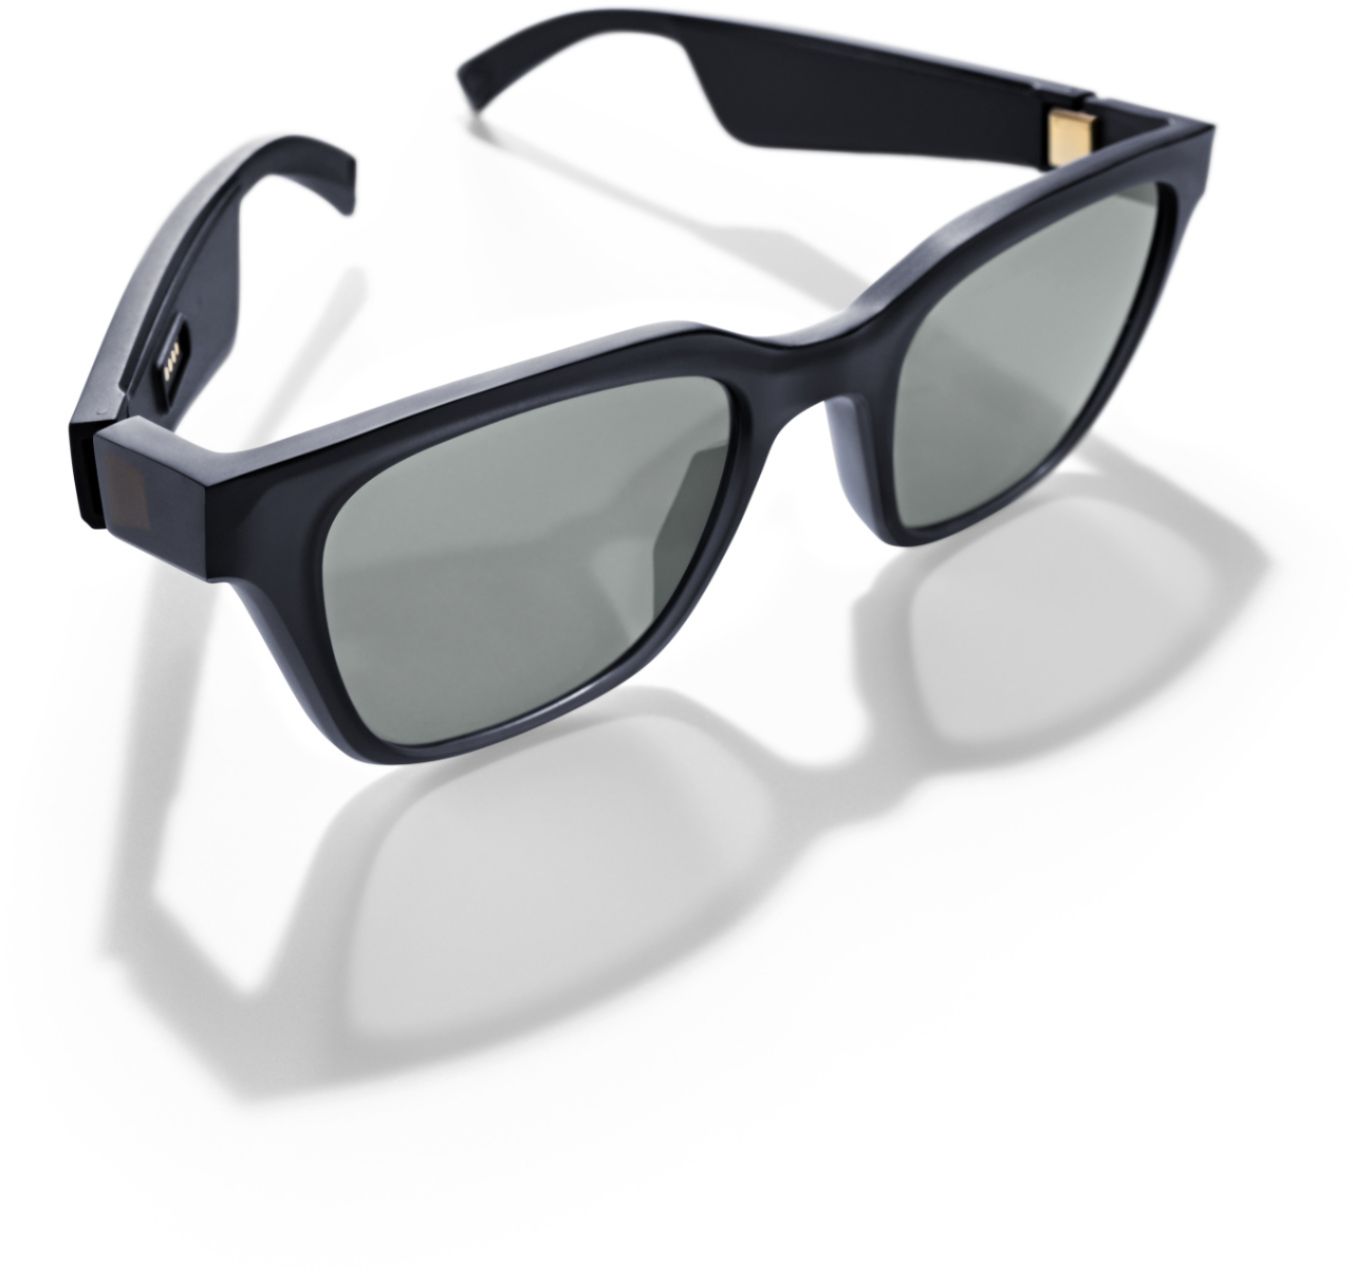 Audio Sunglasses with Open Ear Headphones Bose Frames Alto S/M Black- with Bluetooth Connectivity